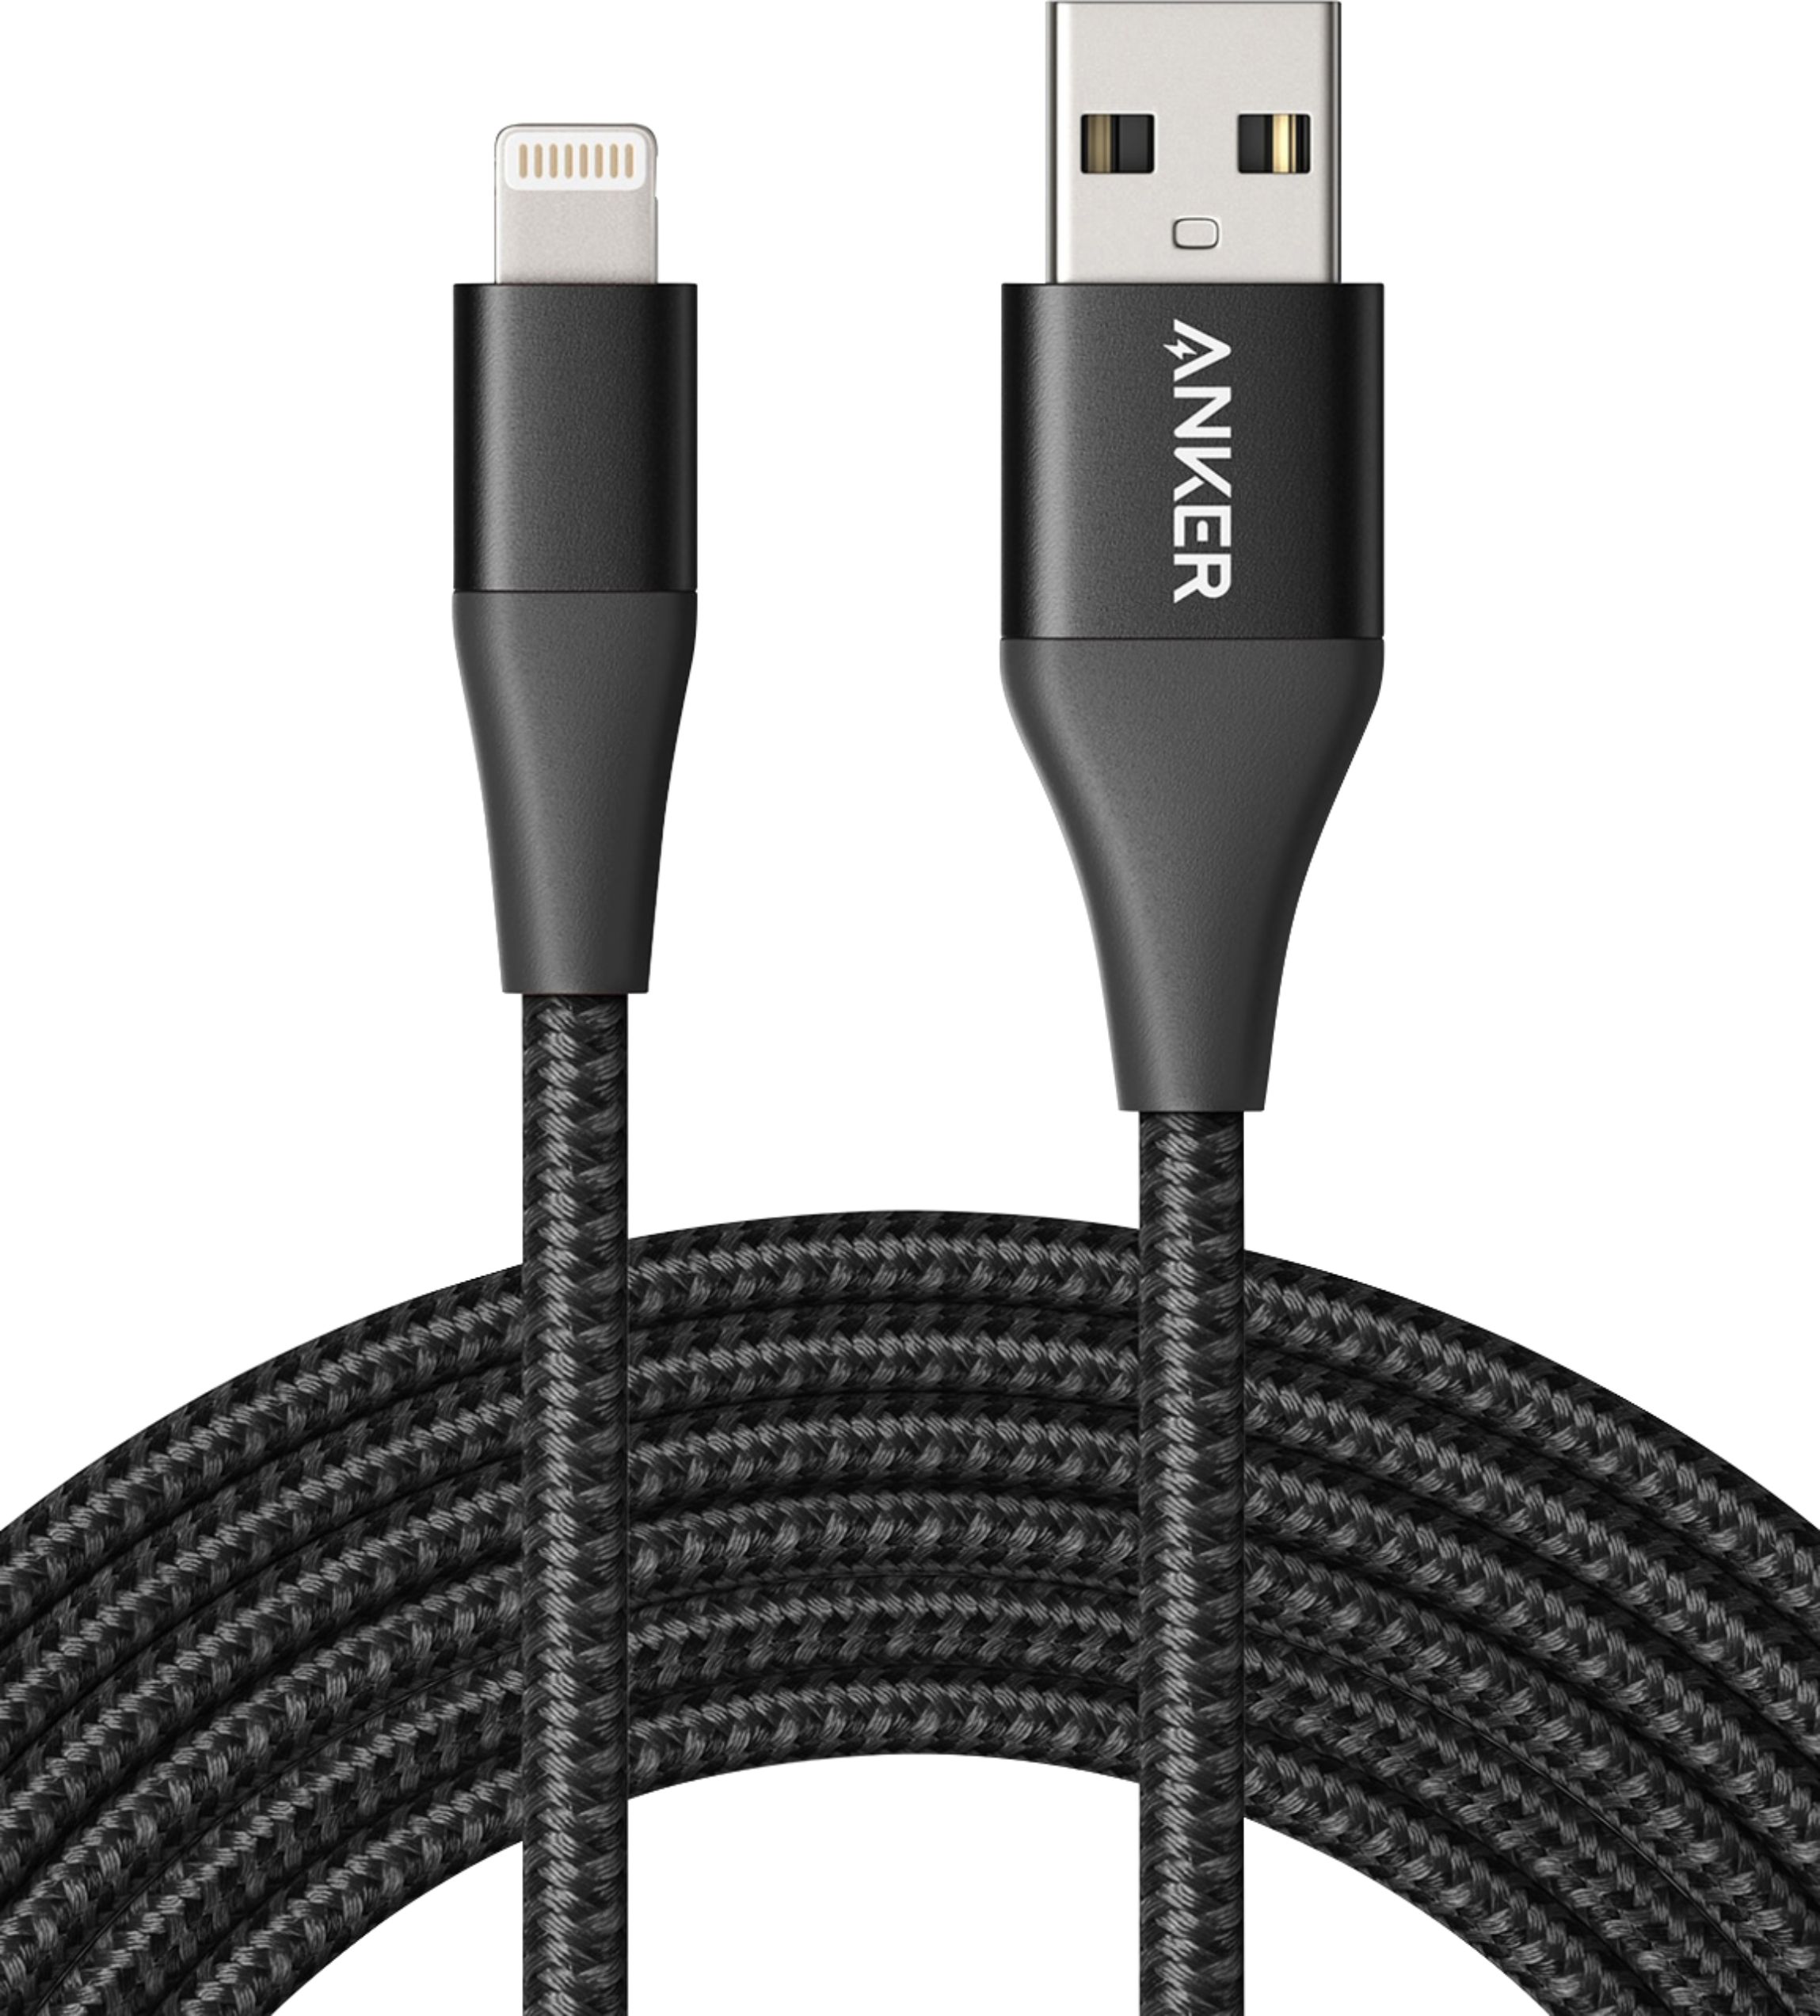 Anker Powerline+ II USB-A to Lightning Cable 6-ft Black A8453H13-1 -